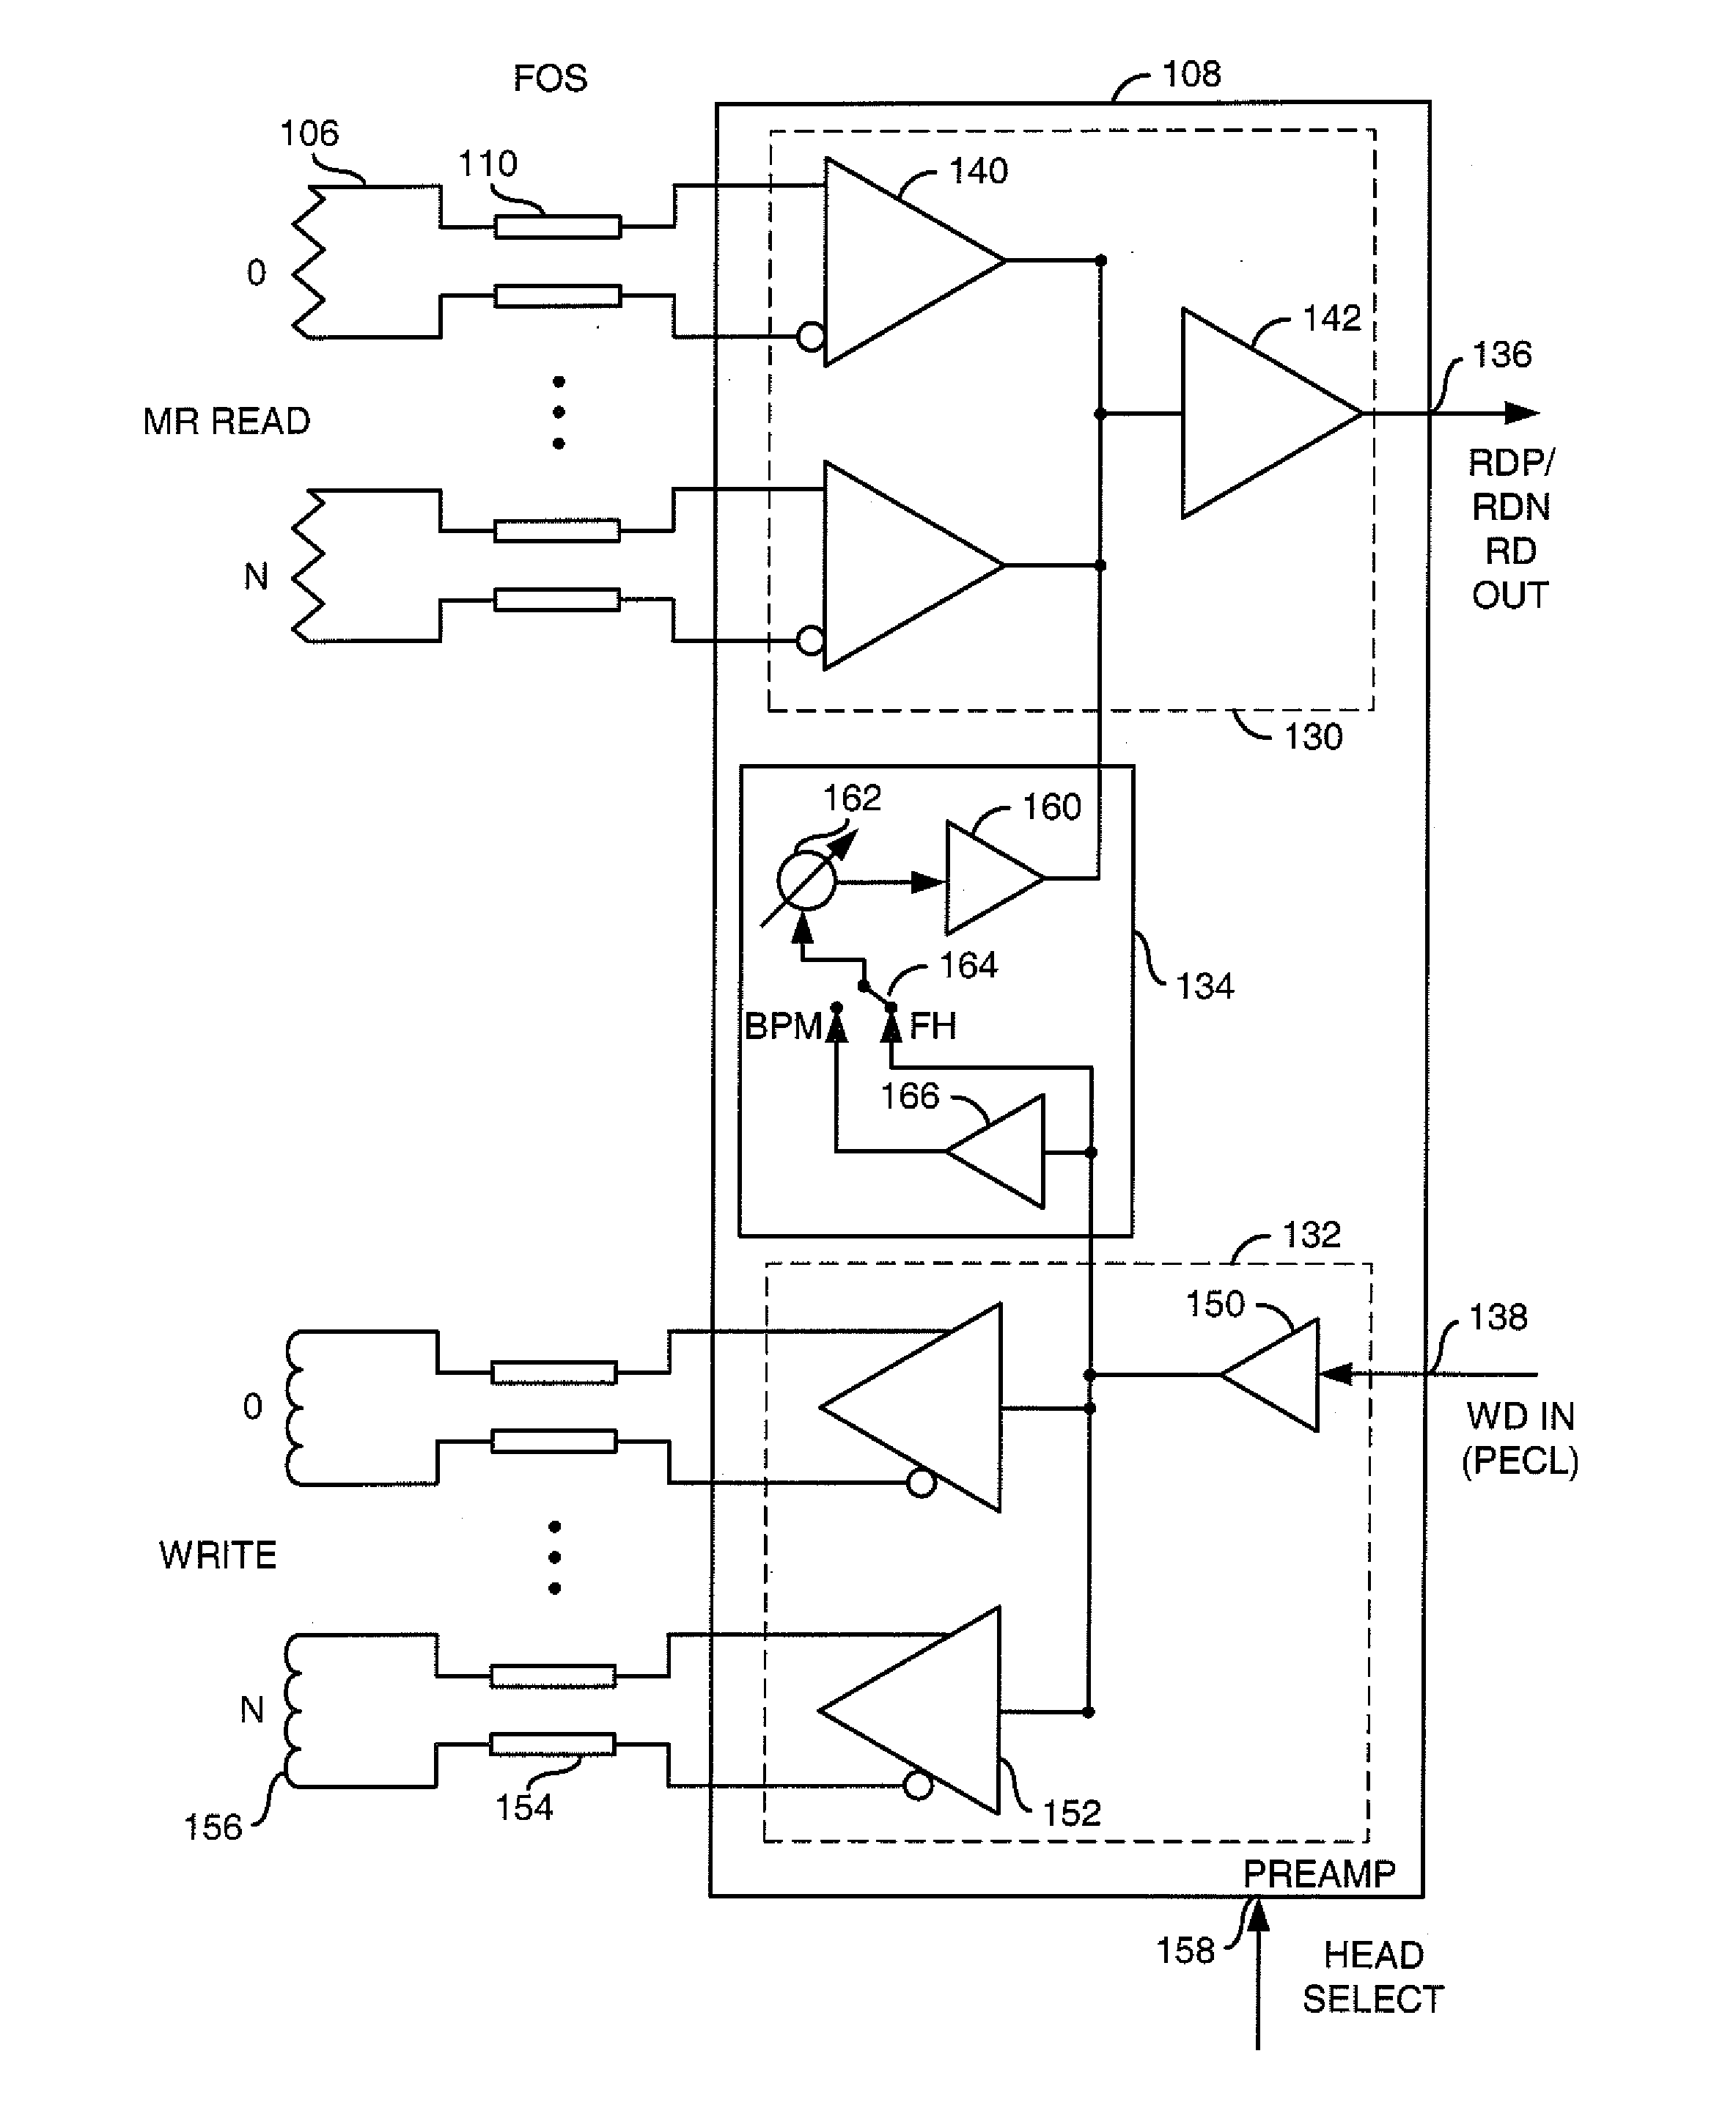 Disk file preamplifier frequency-response and time delay compensation